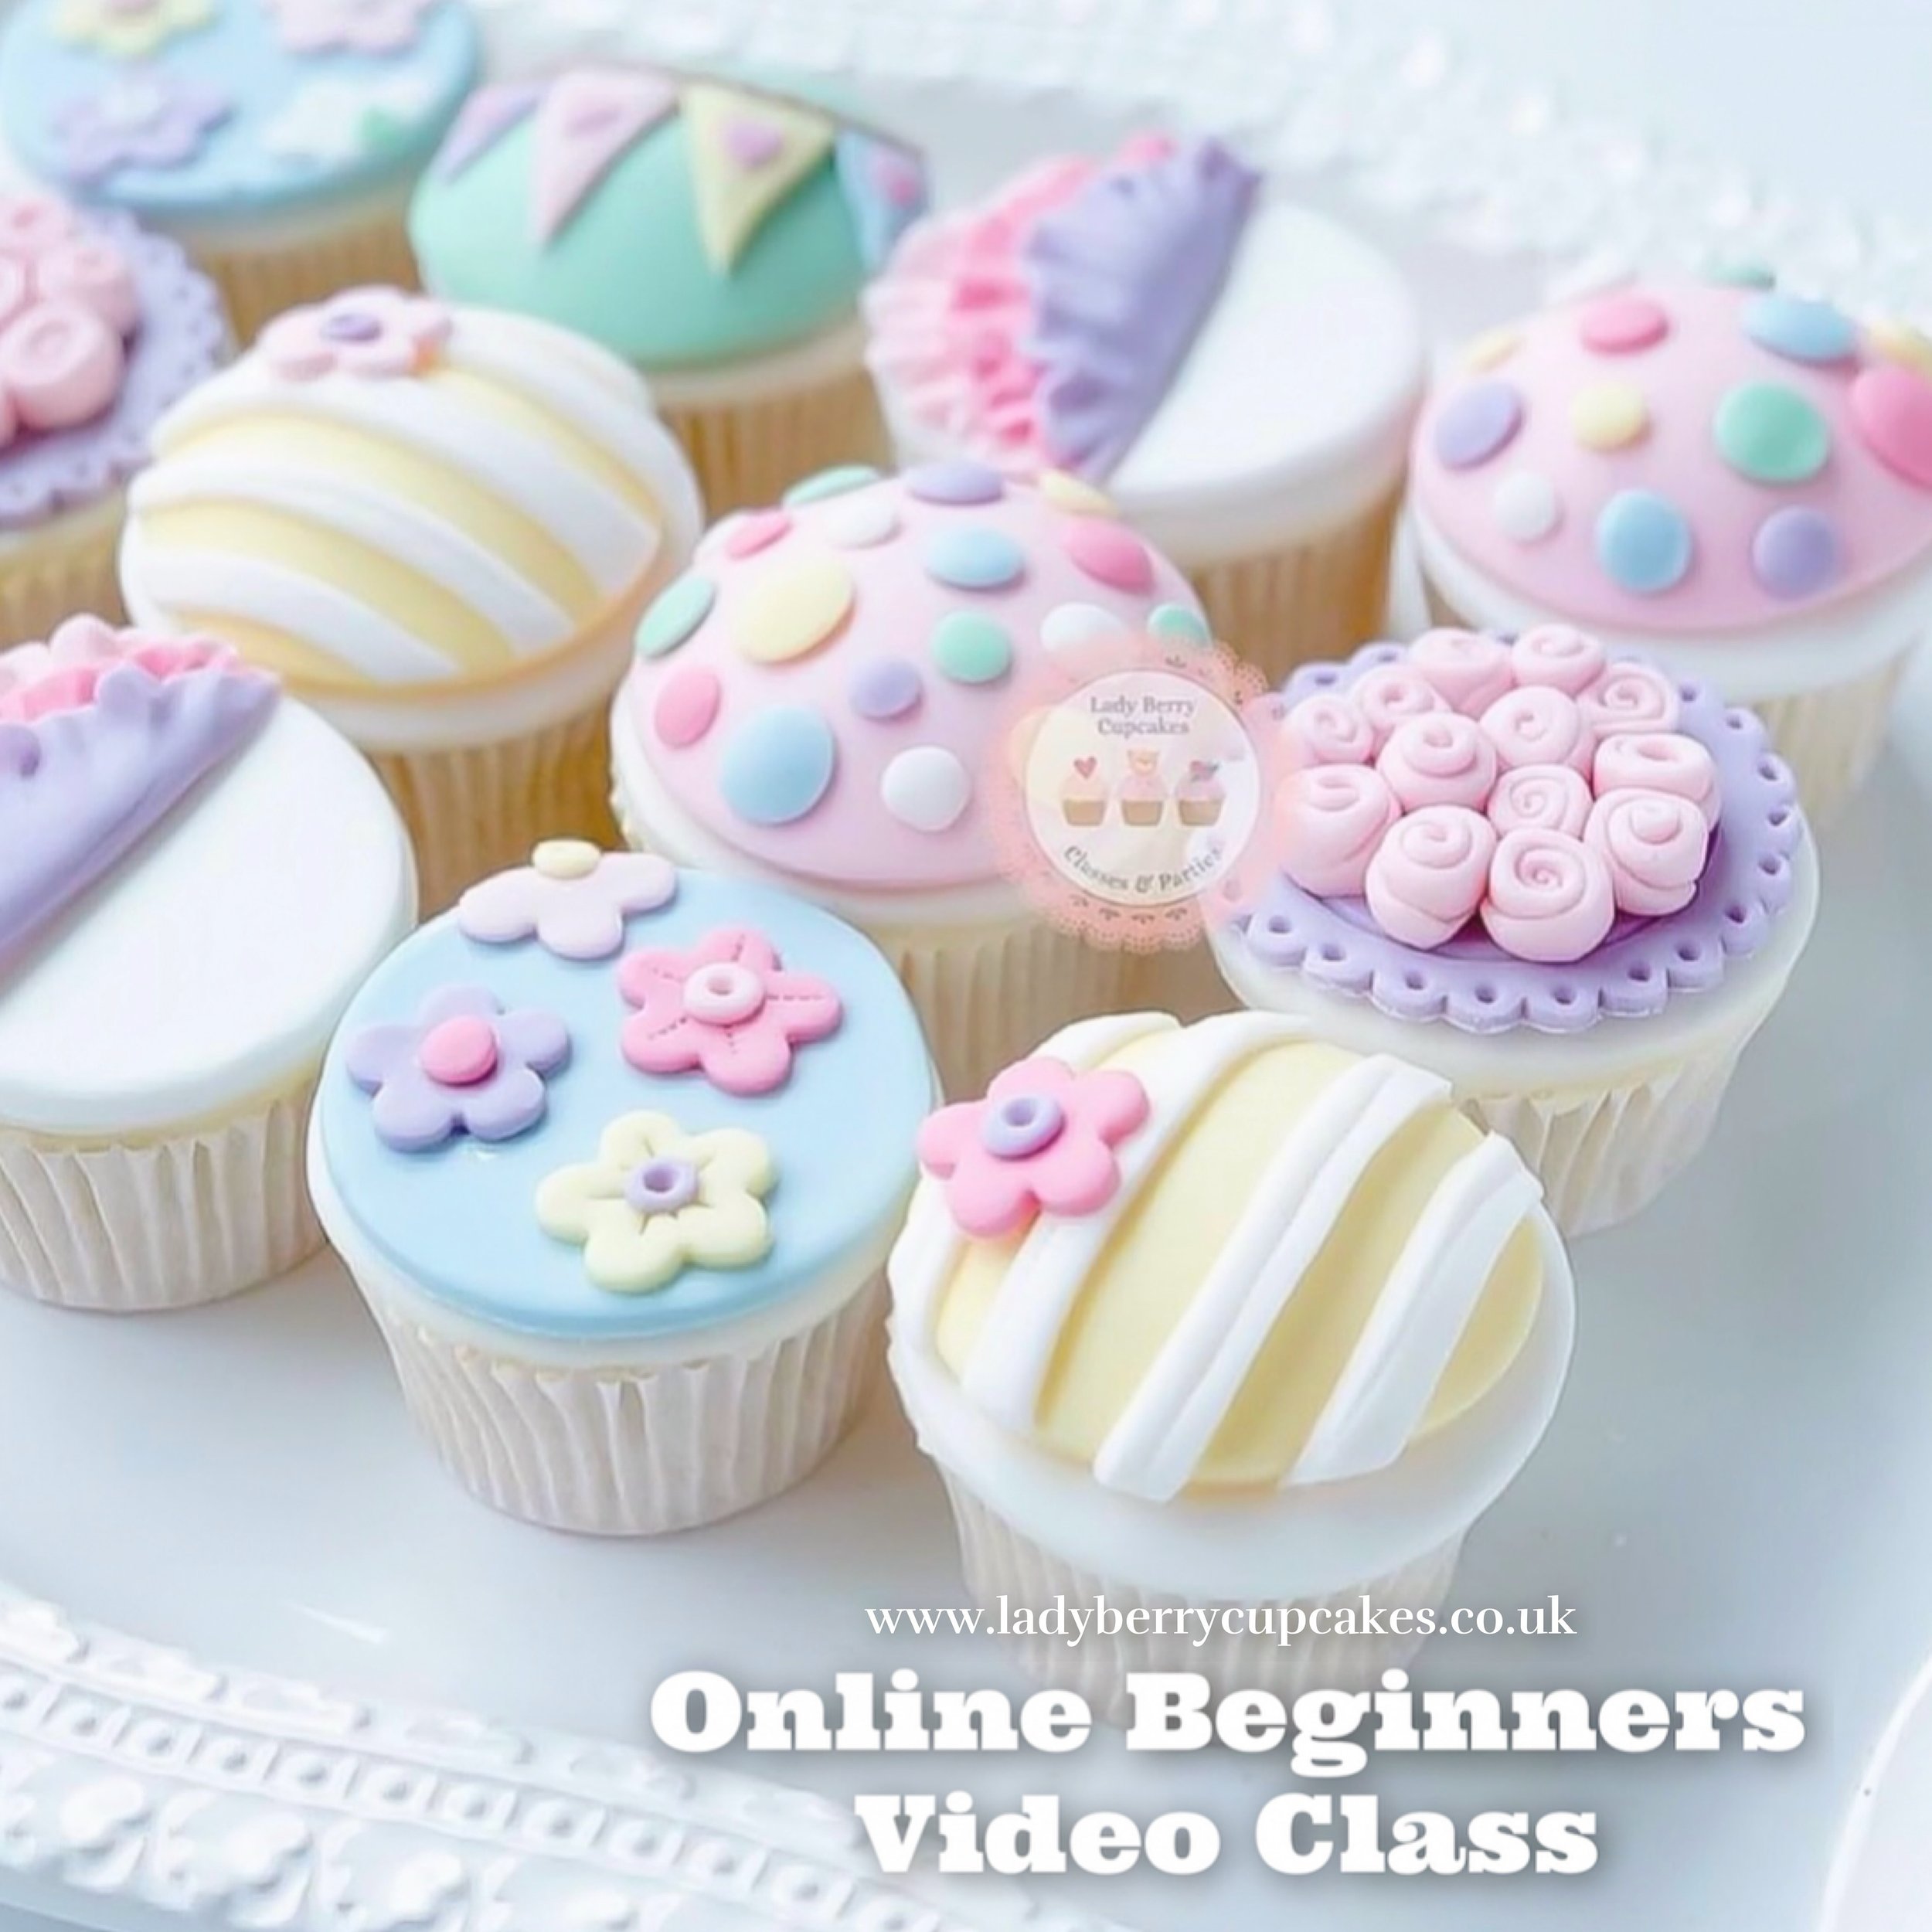 🧁 Calling beginners! Start your fondant journey with the Online Beginners Cupcake Video Class! Learn to create this selection of pretty fondant cupcakes!

⭐️ Click link to online classes at www.ladyberrycupcakes.co.uk 

#BeginnersCupcakeClass #HowTo